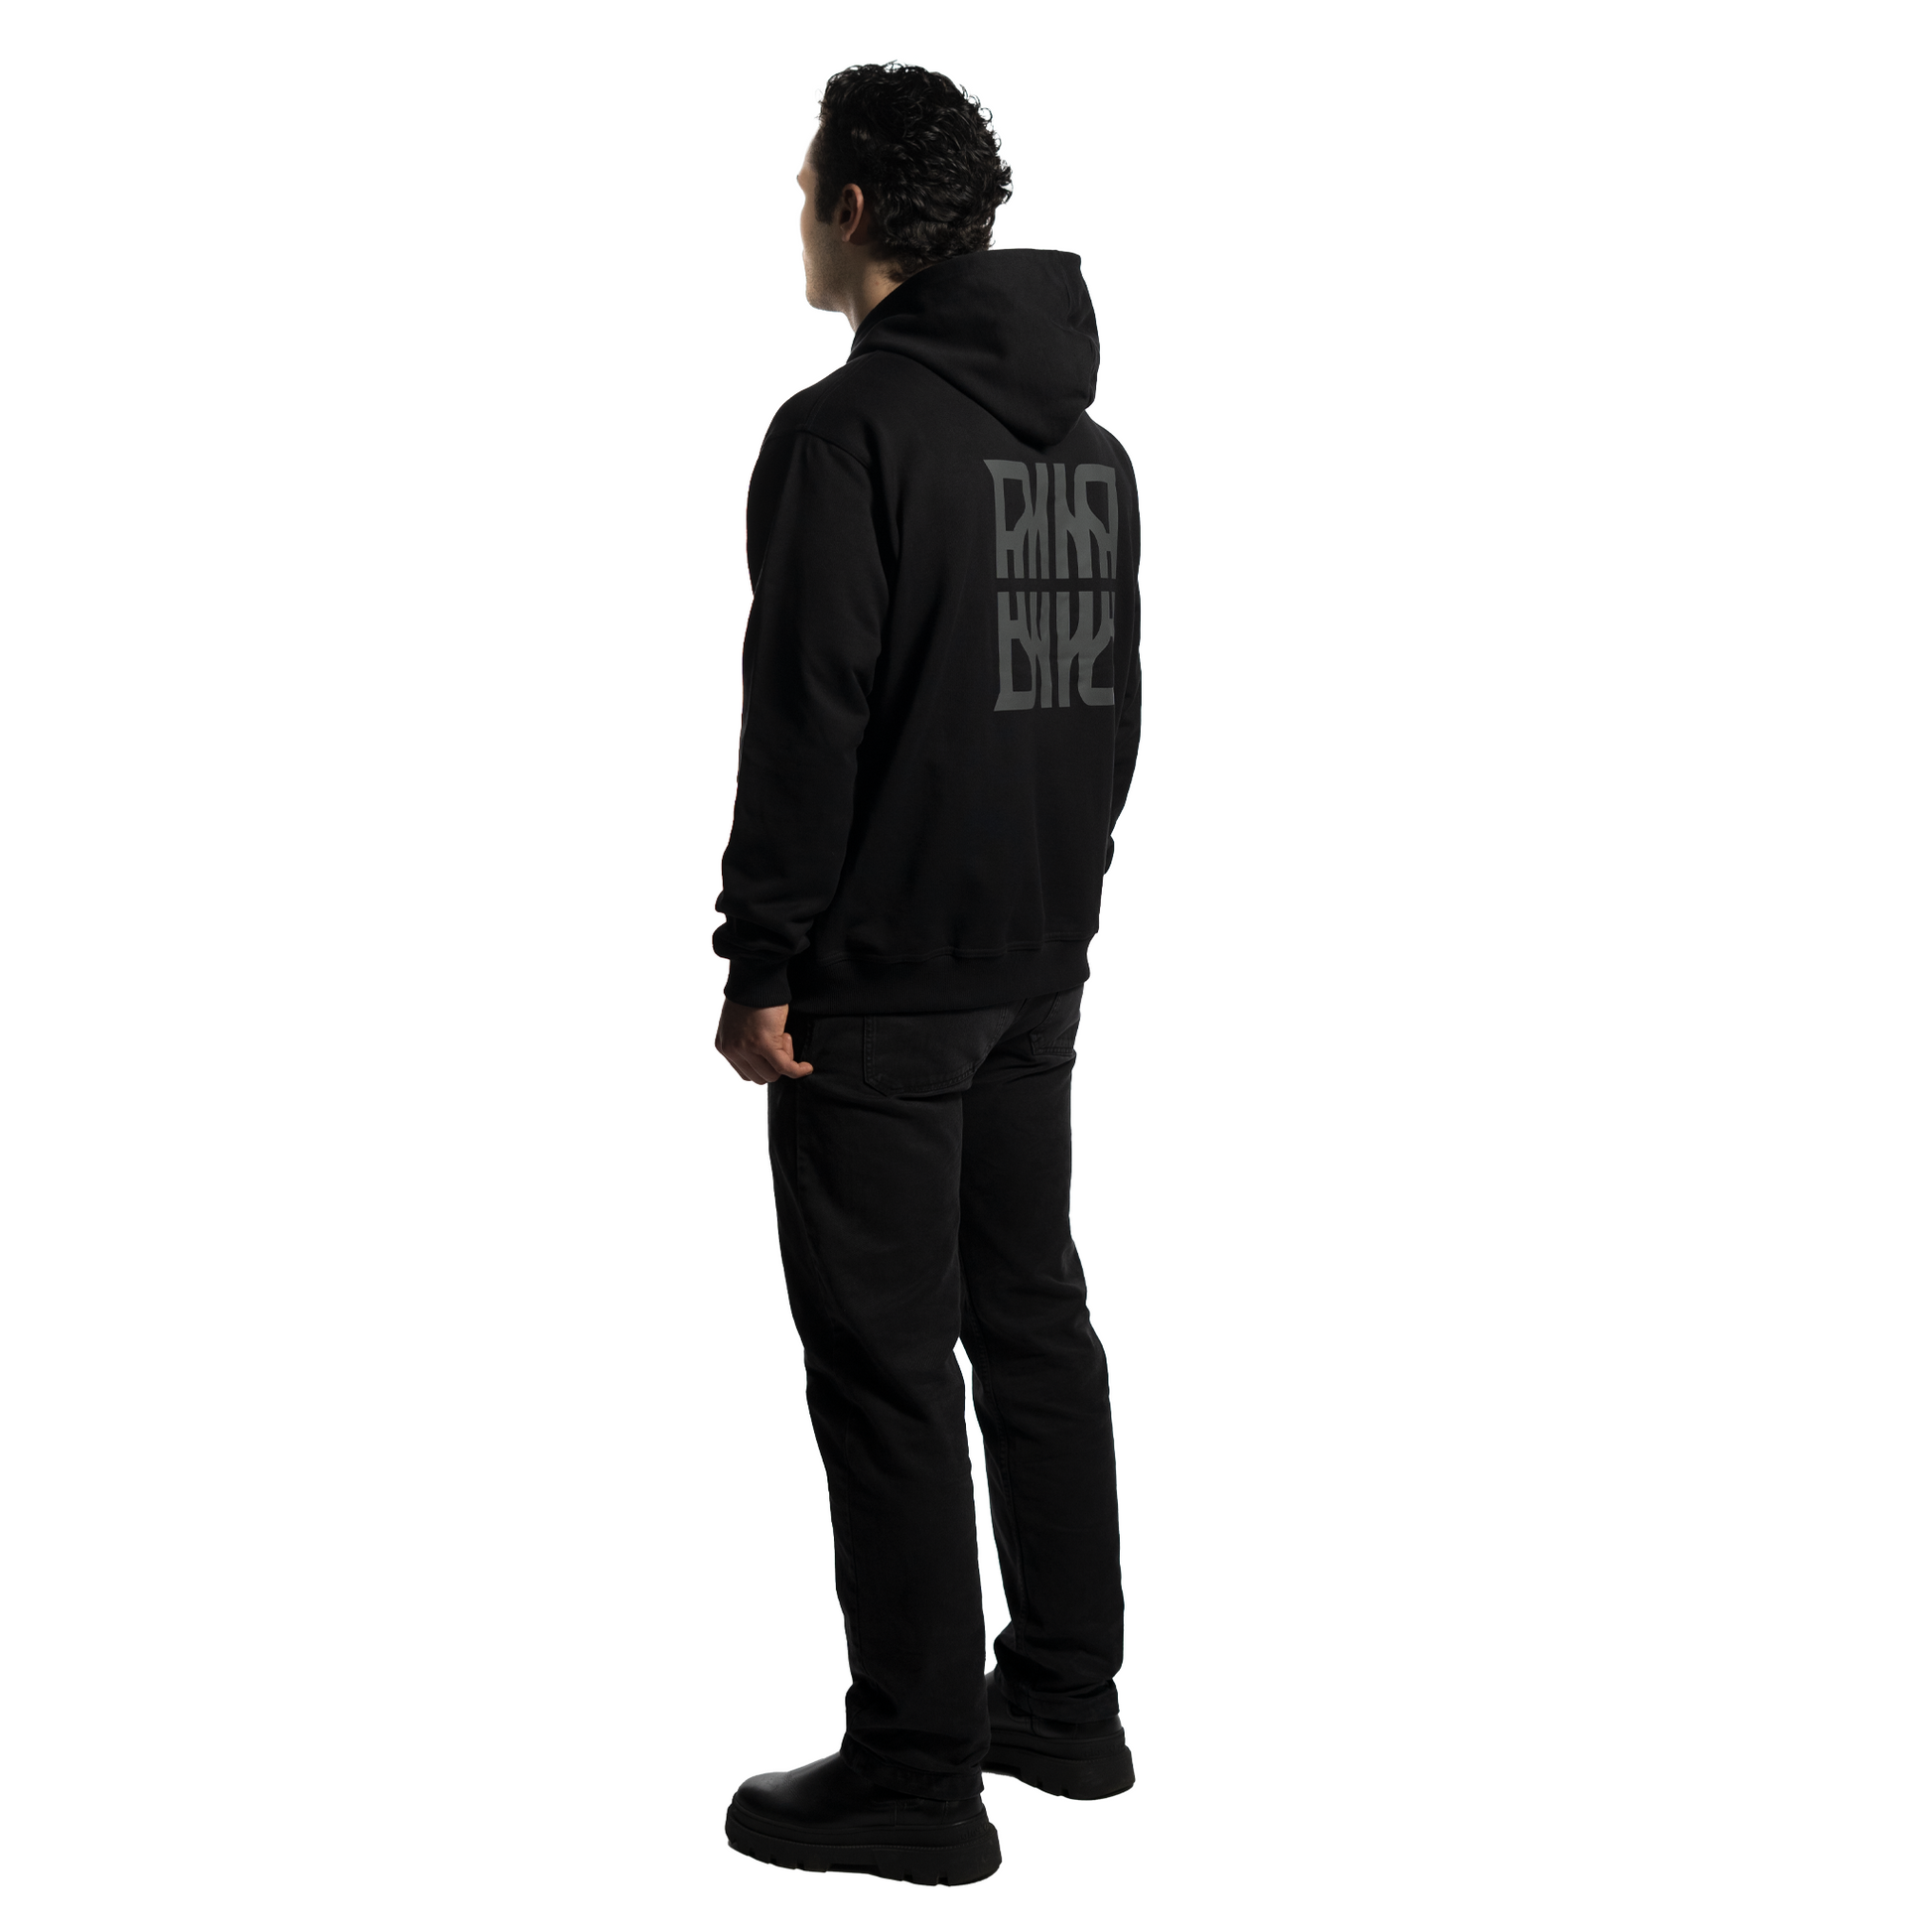 An elegant person wearing a luxurious black FRIEDENMEER zip up hoodie with a unique logo design, paired with stylish black trousers and modern shoes, showcasing high-end fashion.